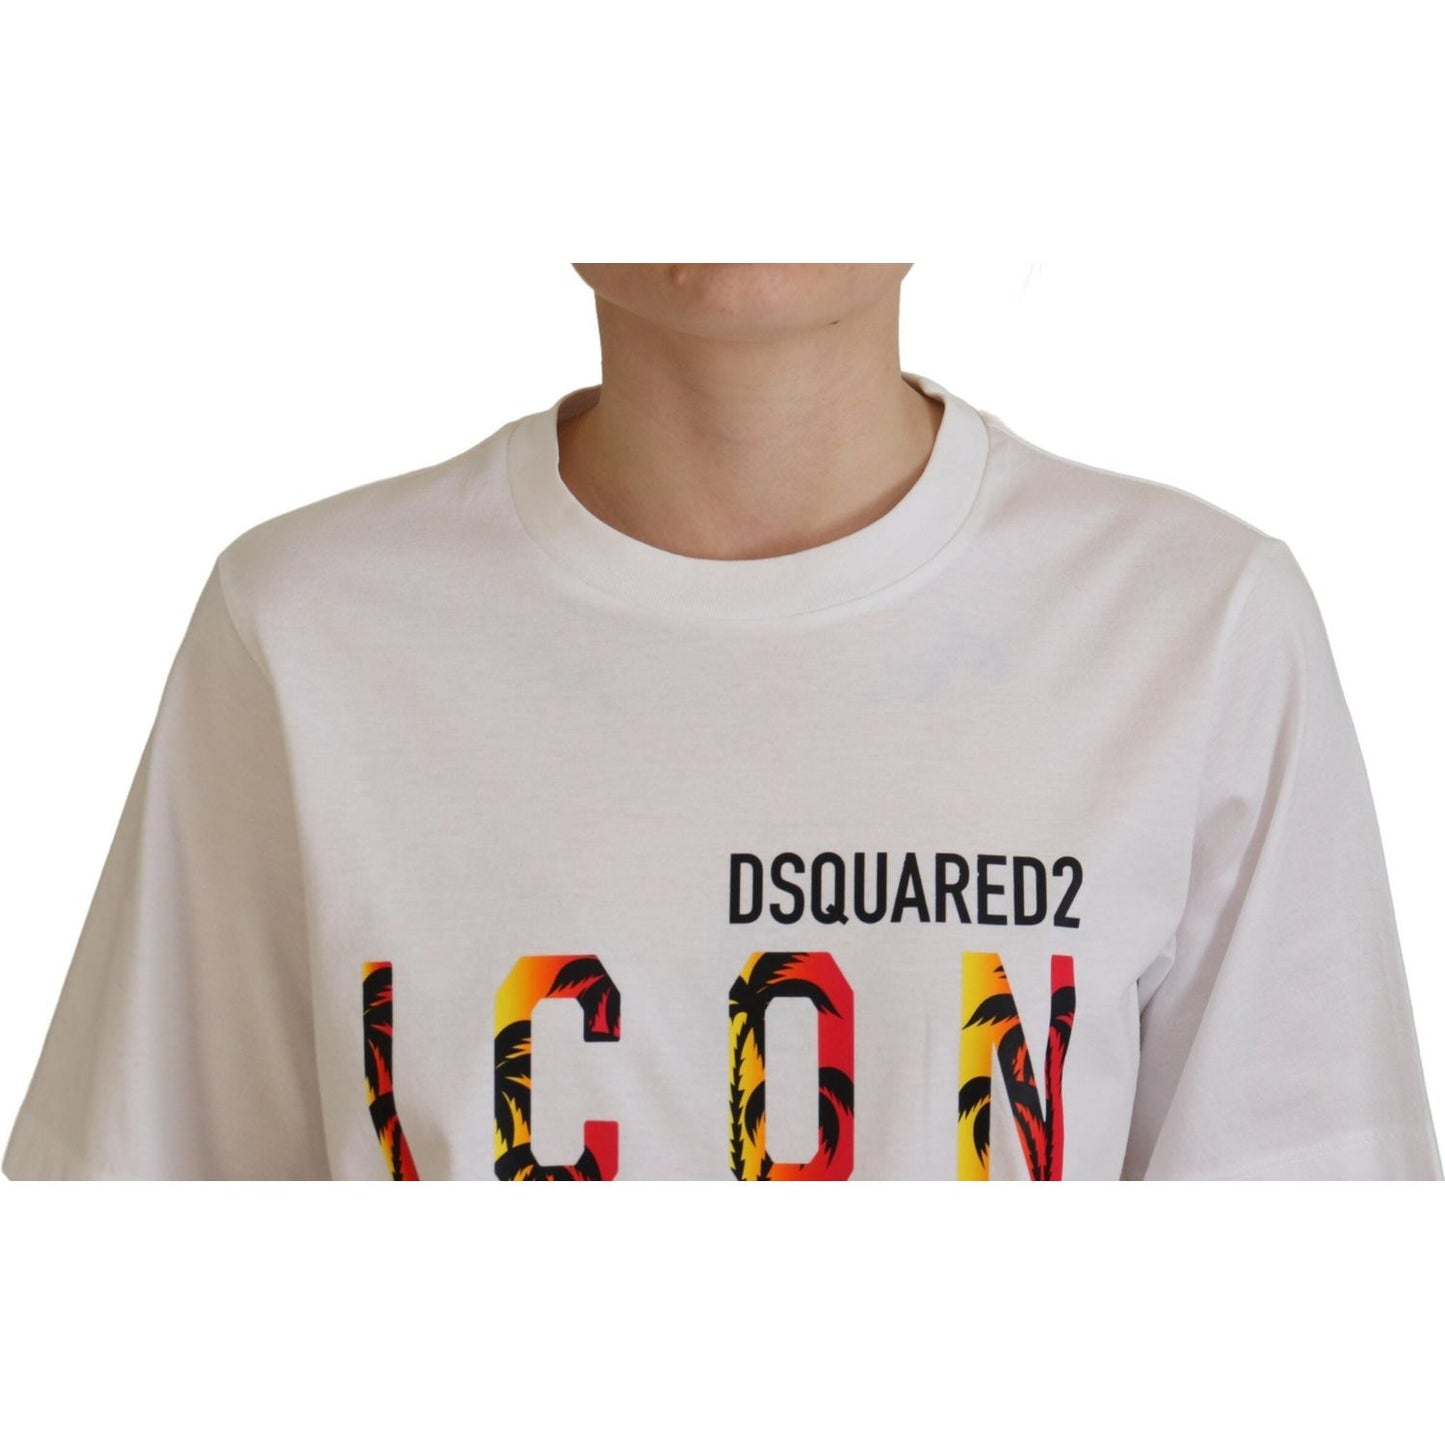 Dsquared² White Cotton Shiny Icon East Tee Crewneck T-shirt white-cotton-shiny-icon-east-tee-crewneck-t-shirt